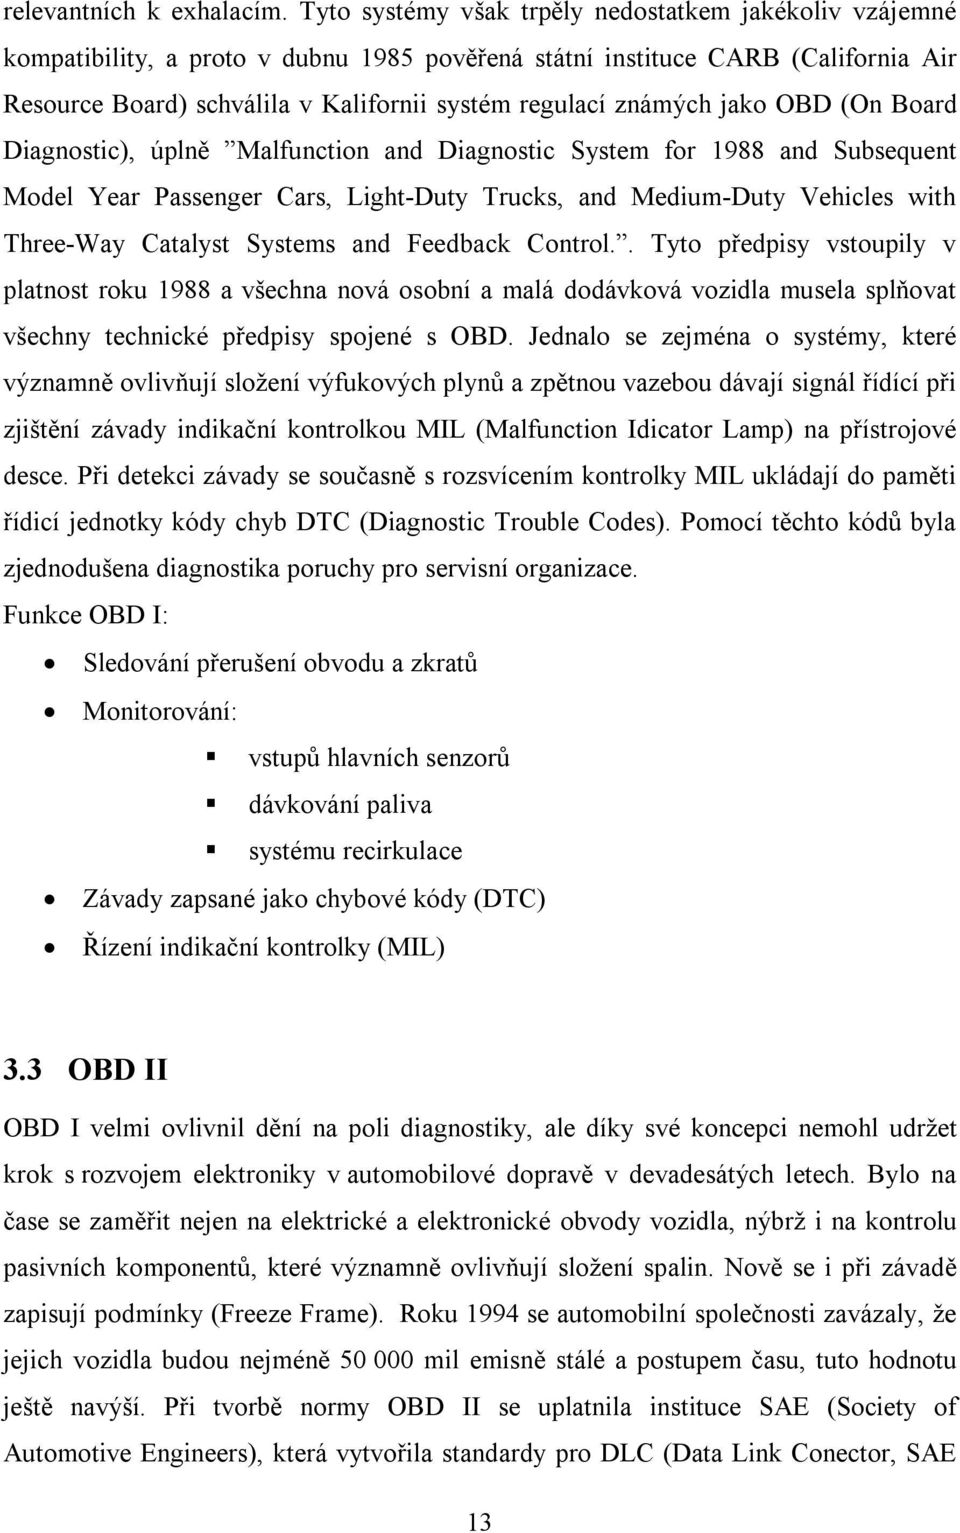 známých jako OBD (On Board Diagnostic), úplně Malfunction and Diagnostic System for 1988 and Subsequent Model Year Passenger Cars, Light-Duty Trucks, and Medium-Duty Vehicles with Three-Way Catalyst